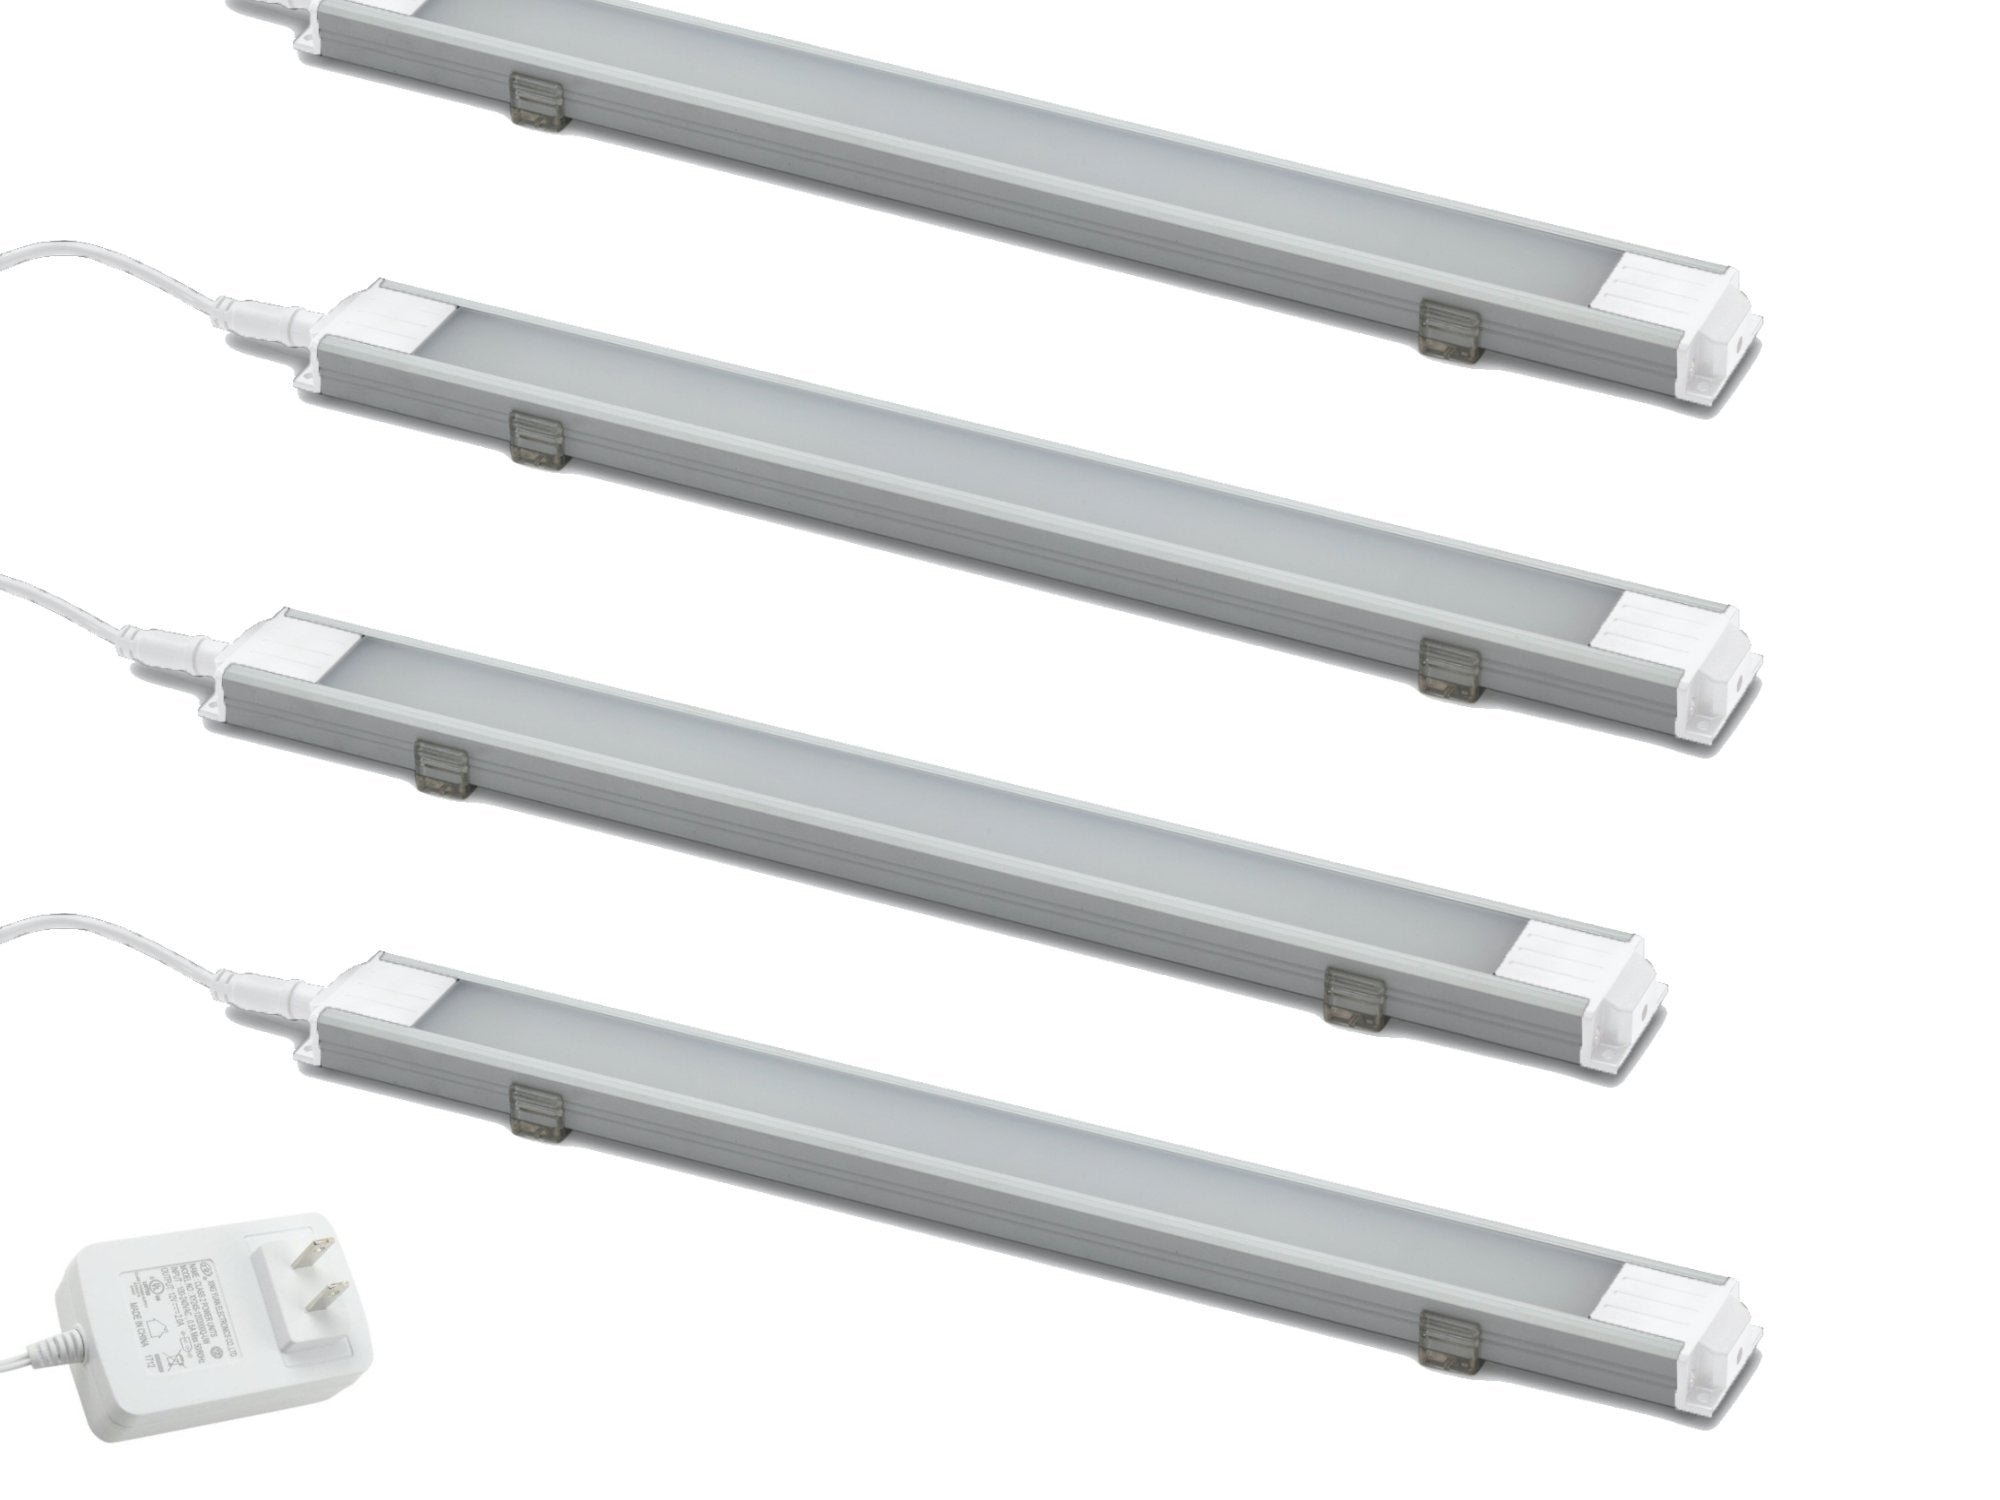 LED Display Lights (2 x Light Adapters, 2 x Light Extensions)